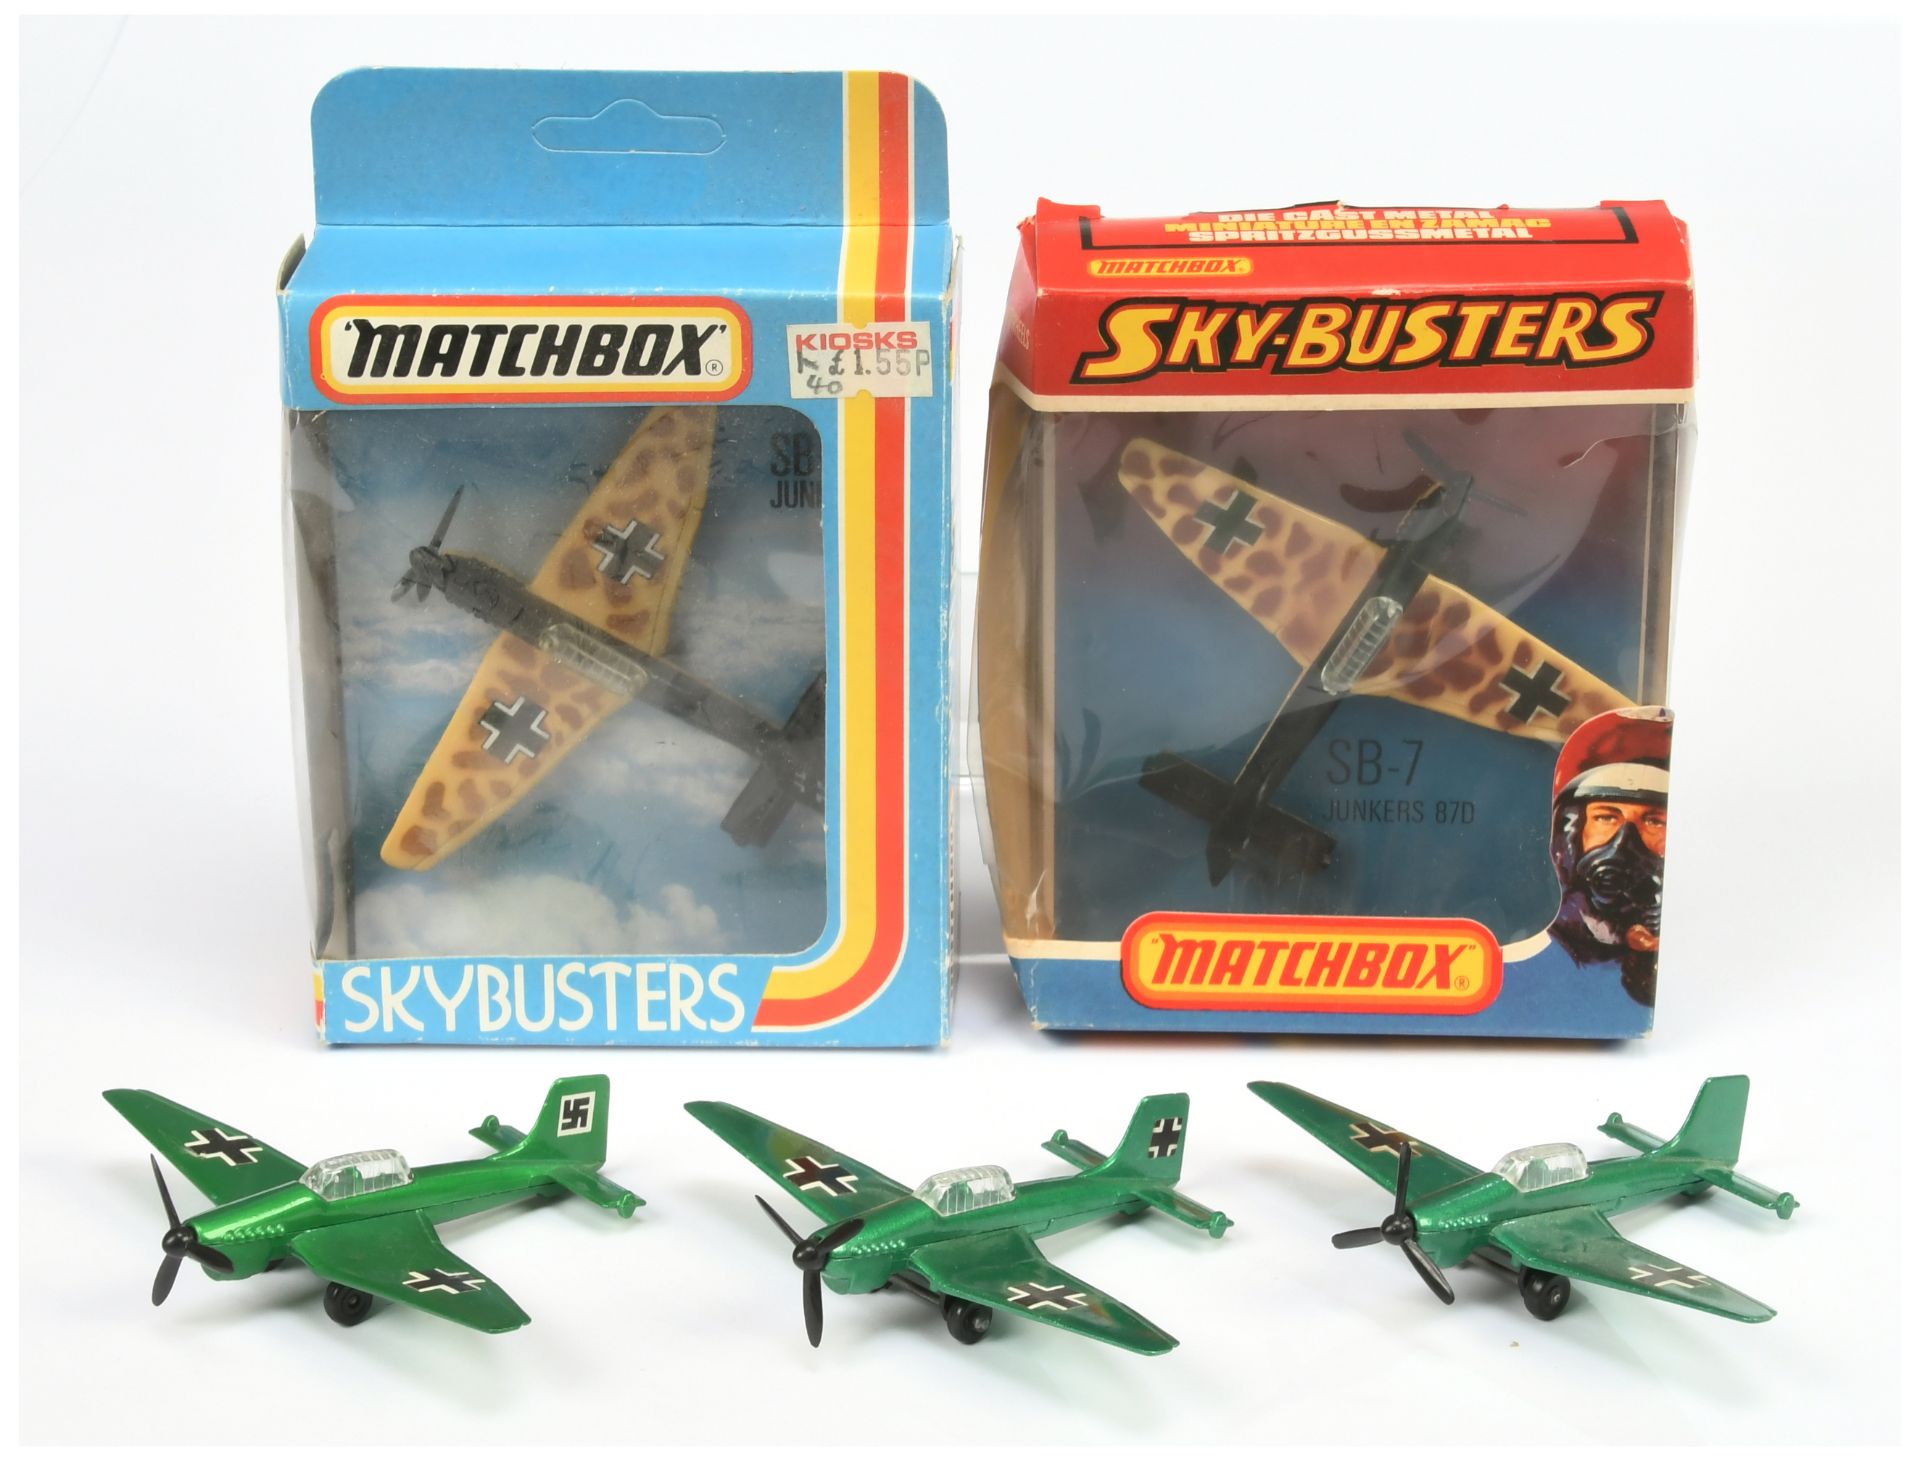 Matchbox Skybusters group of Aircraft